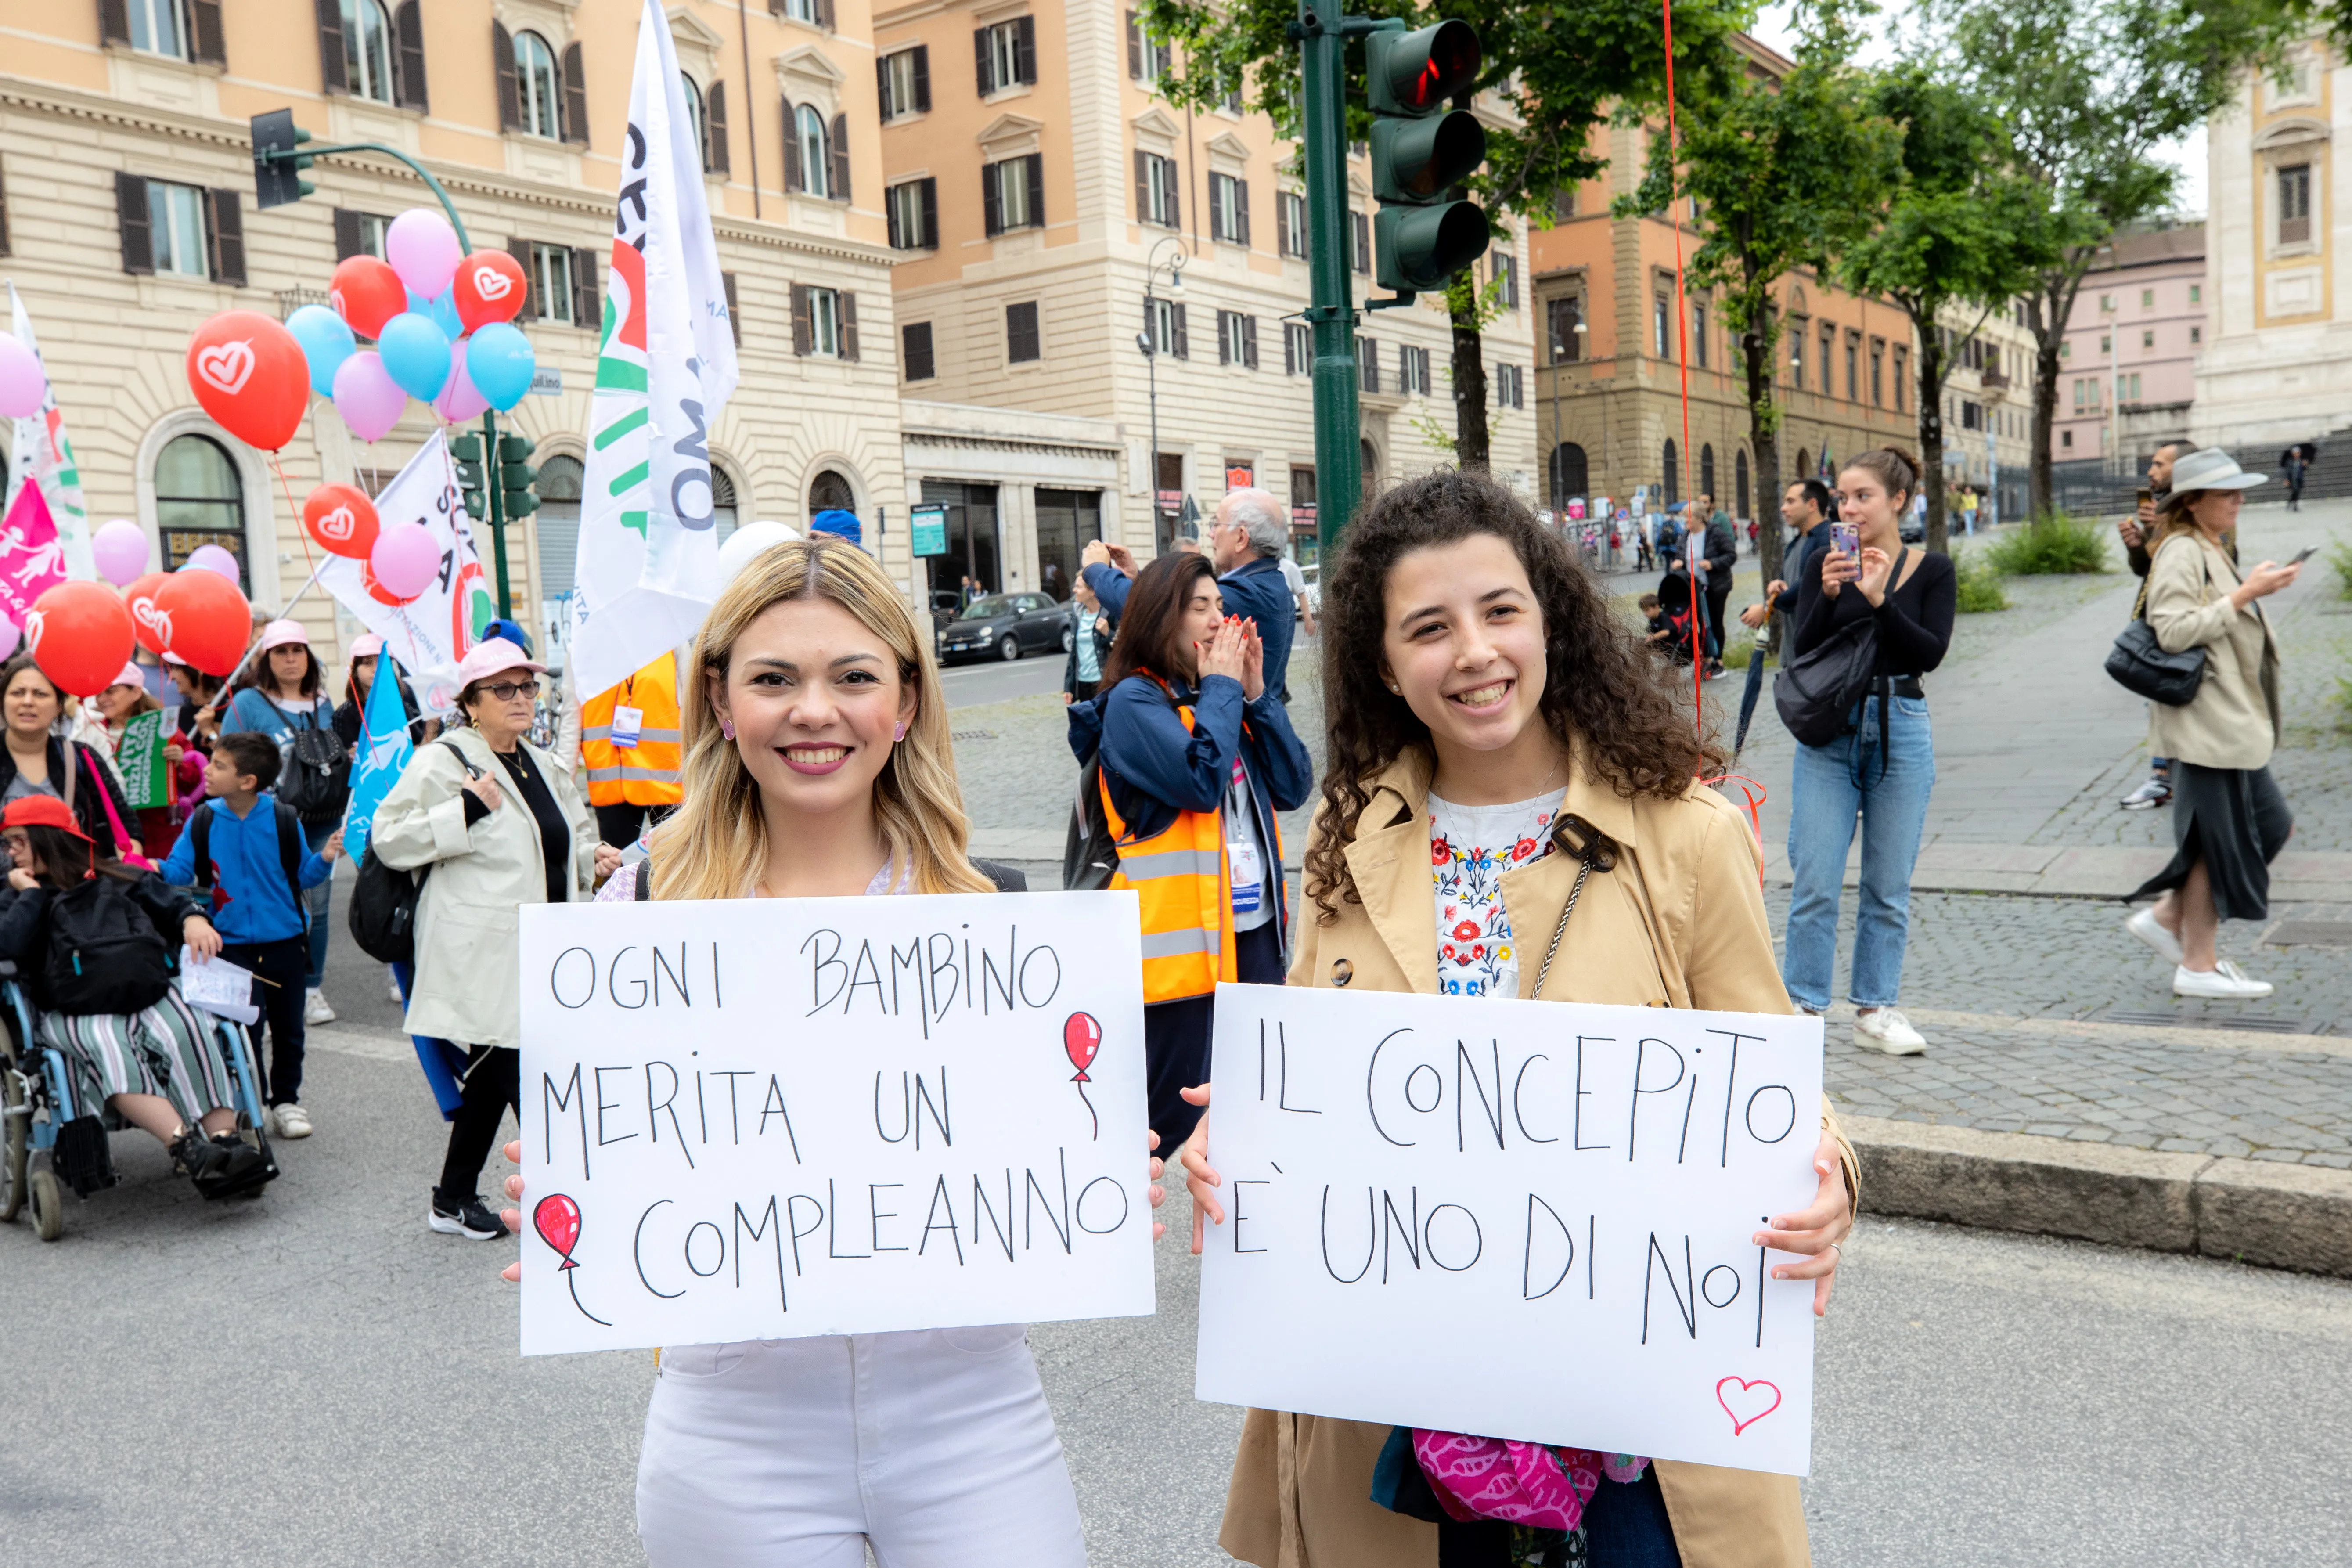 Young women hold signs saying "every child deserves a birthday" and "the unborn baby is one of us" at Italy's national "Demonstration for Life" in Rome May 20, 2023. Daniel Ibanez/CNA